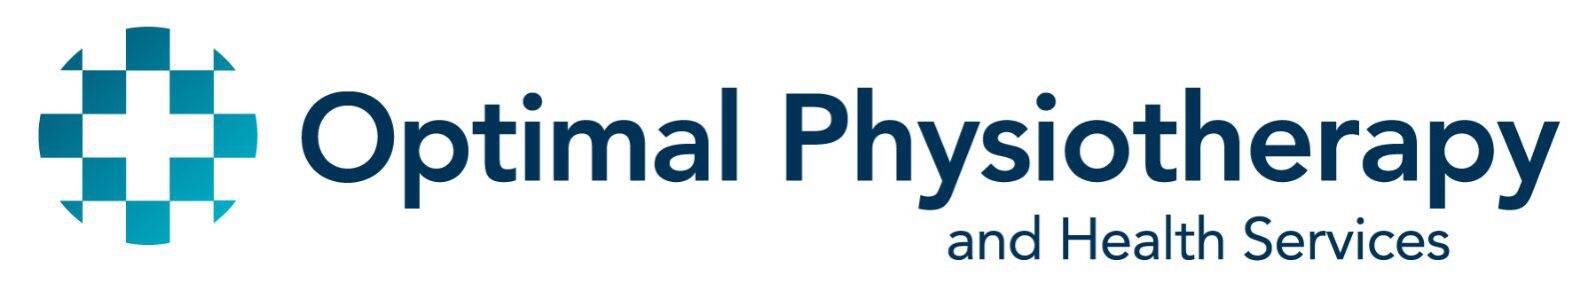 Optimal Physiotherapy and Health Services